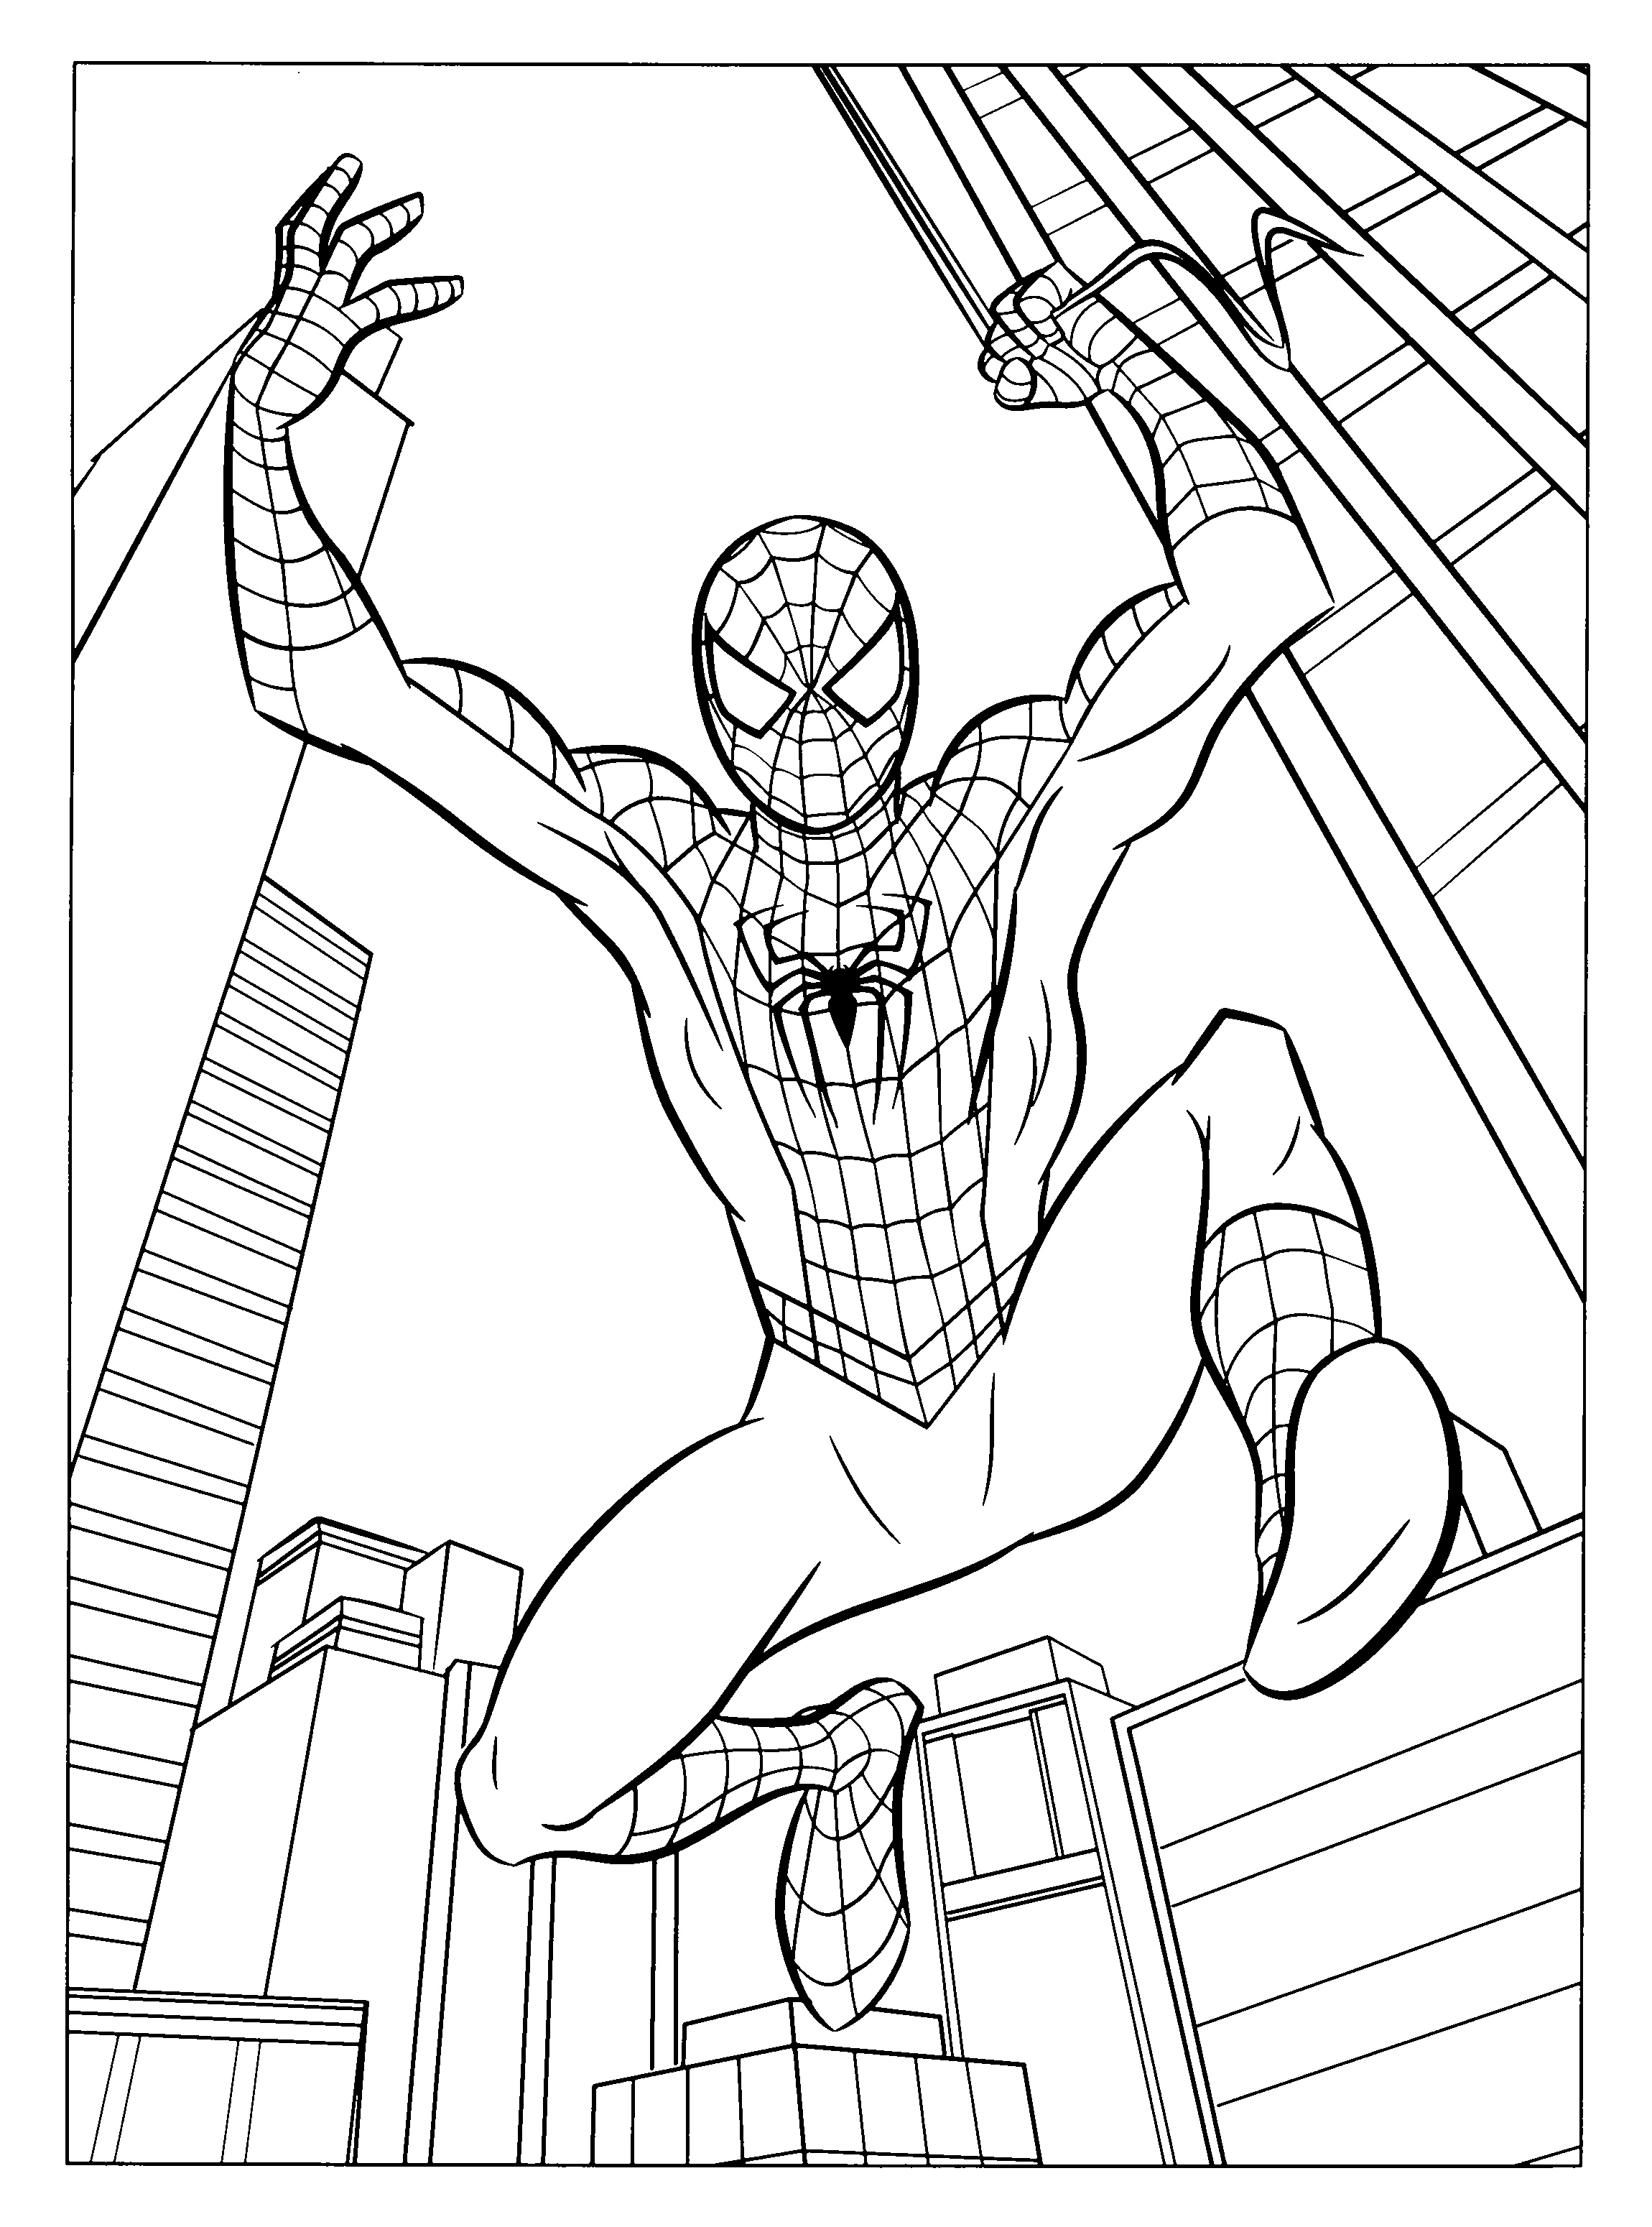 Coloriage Spiderman A Imprimer Luxe Stock Spiderman 1 Super Héros – Coloriages à Imprimer